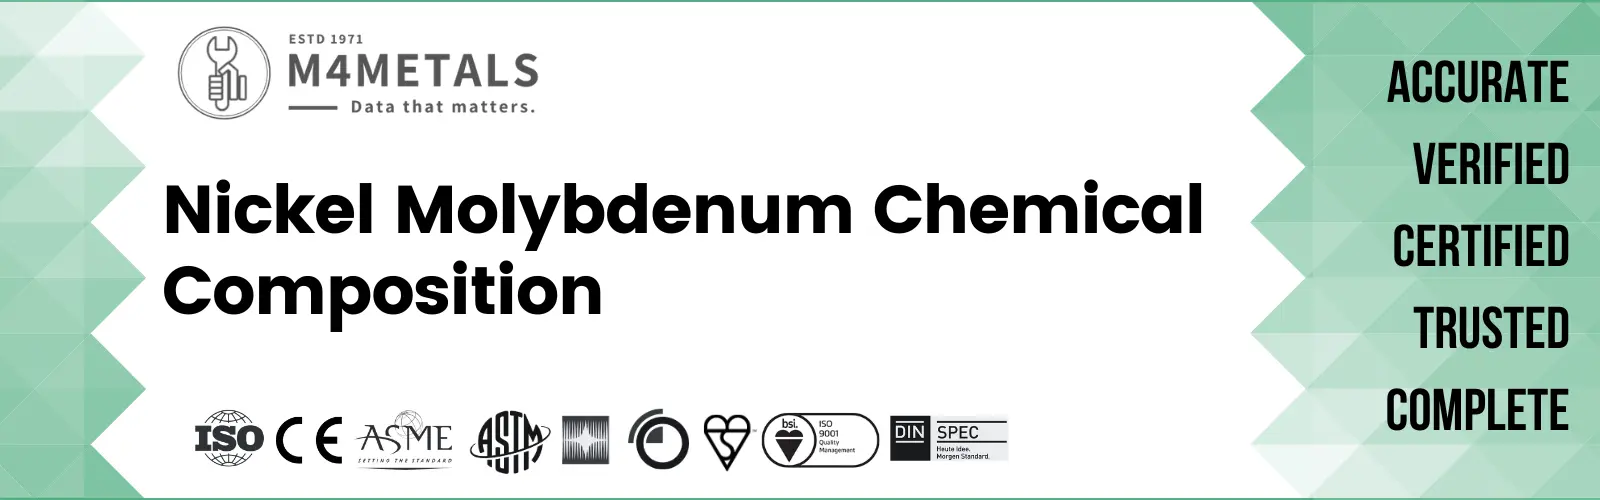 Nickel Molybdenum Chemical Composition